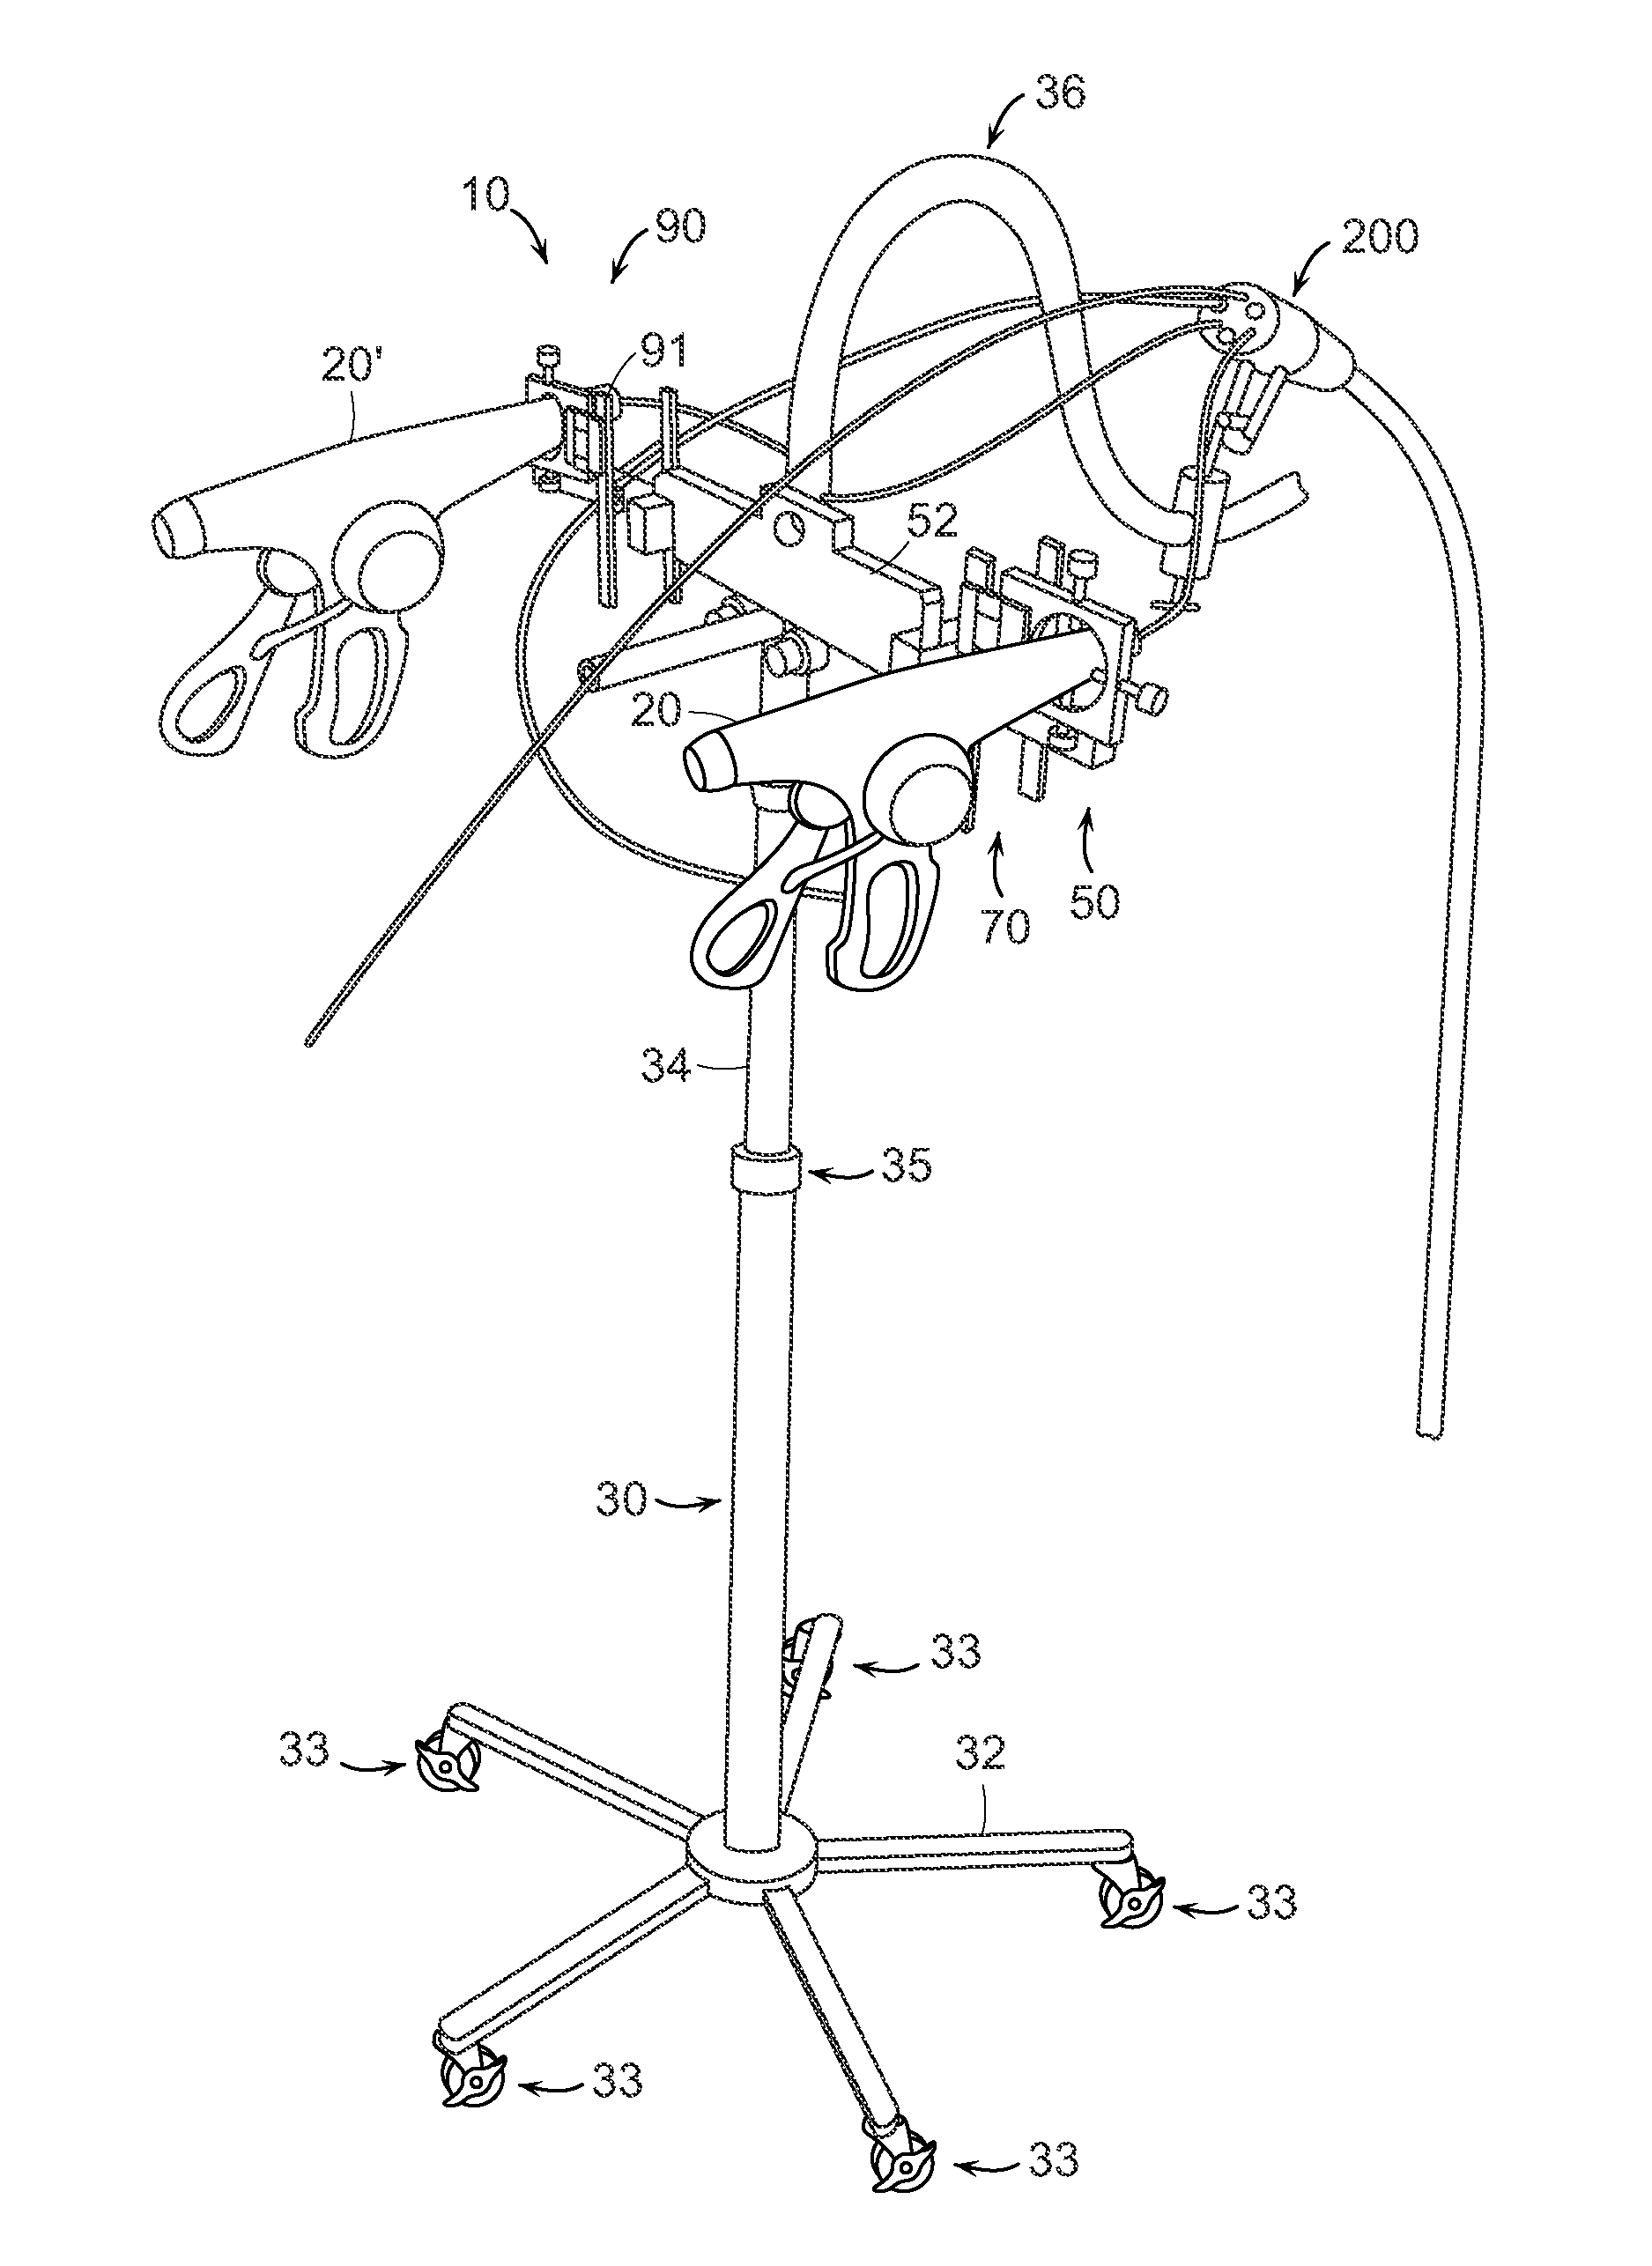 Interface systems for aiding clinicians in controlling and manipulating at least one endoscopic surgical instrument and a cable controlled guide tube system